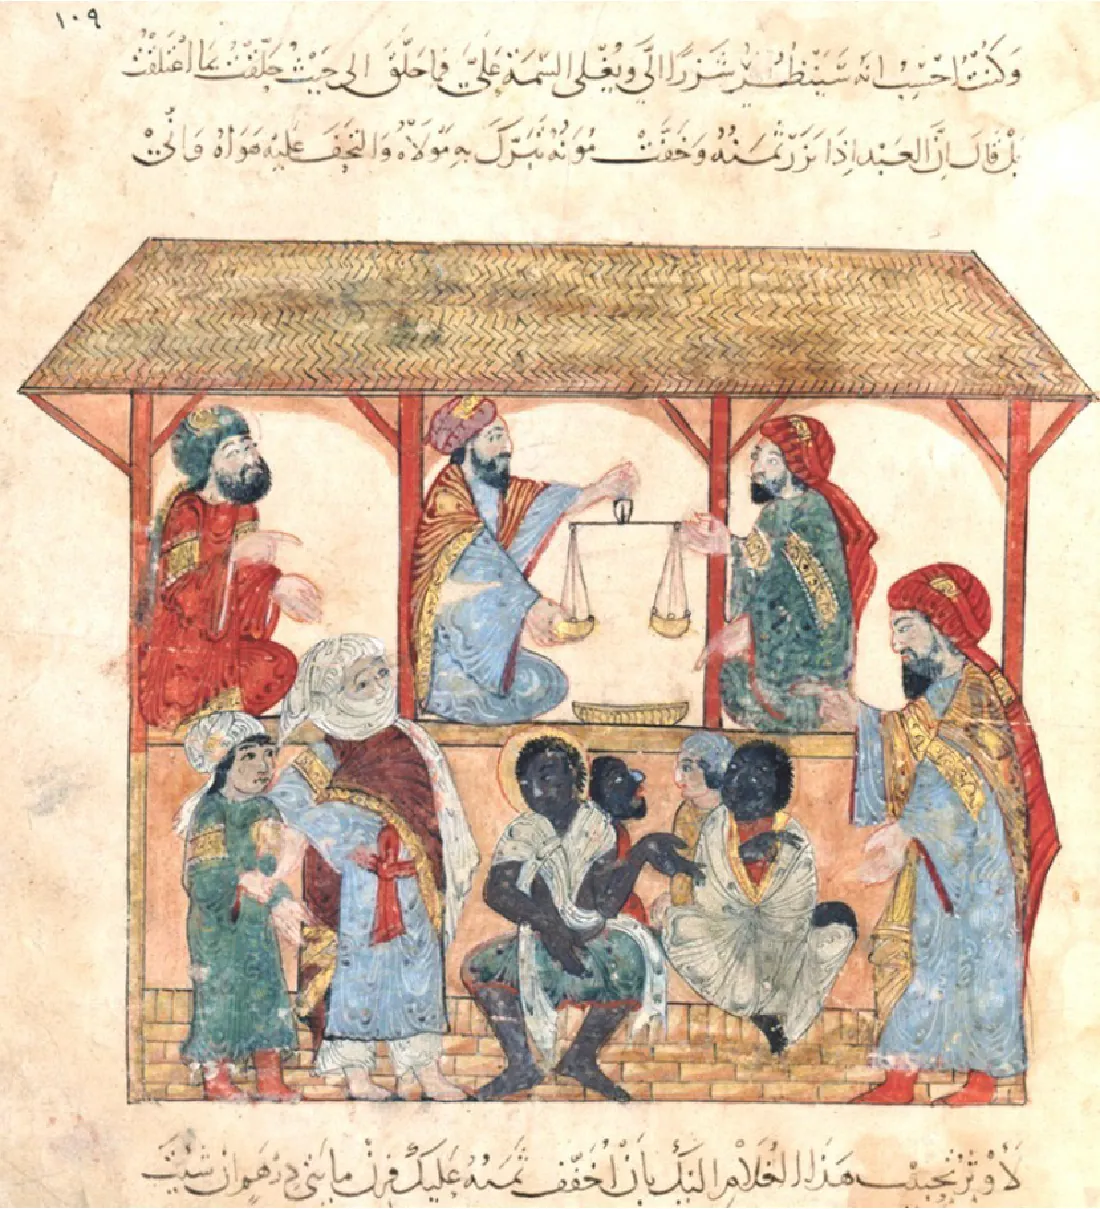 A drawing of a straw roofed hut is shown. There are two tiers. At the top, open tier, three black-bearded men kneel in gold trimmed colorful turbans and draped clothing. The man on the left is pointing with his hands, while the man in the middle is holding a scale and looking at the man at the right, who is looking back at him and pointing to a flat basket below the scale. On the lower tier, people are shown in front of a wall of the hut. In the left corner of the drawing a man with a white cloth covering his face, dressed in a blue long shirt with a gold trimmed red cape is shown pushing away a shorter person next to him in a green long dress and white turban. They have long black hair and have a scared expression on their face. In the bottom middle three African people sit on the stone road dressed in white cloths, with some colorful shirts and pants peeking through. They are motioning with their hands. A pale skinned man is behind the African person on the right, wearing a yellow shirt and a white cloth on his head. In the right corner of the drawing there is a black-bearded man in a long blue shirt, gold trimmed red cape, gesturing with his hands. He wears an ornate turban on his head. Arabic text runs along the top and bottom of the drawing.